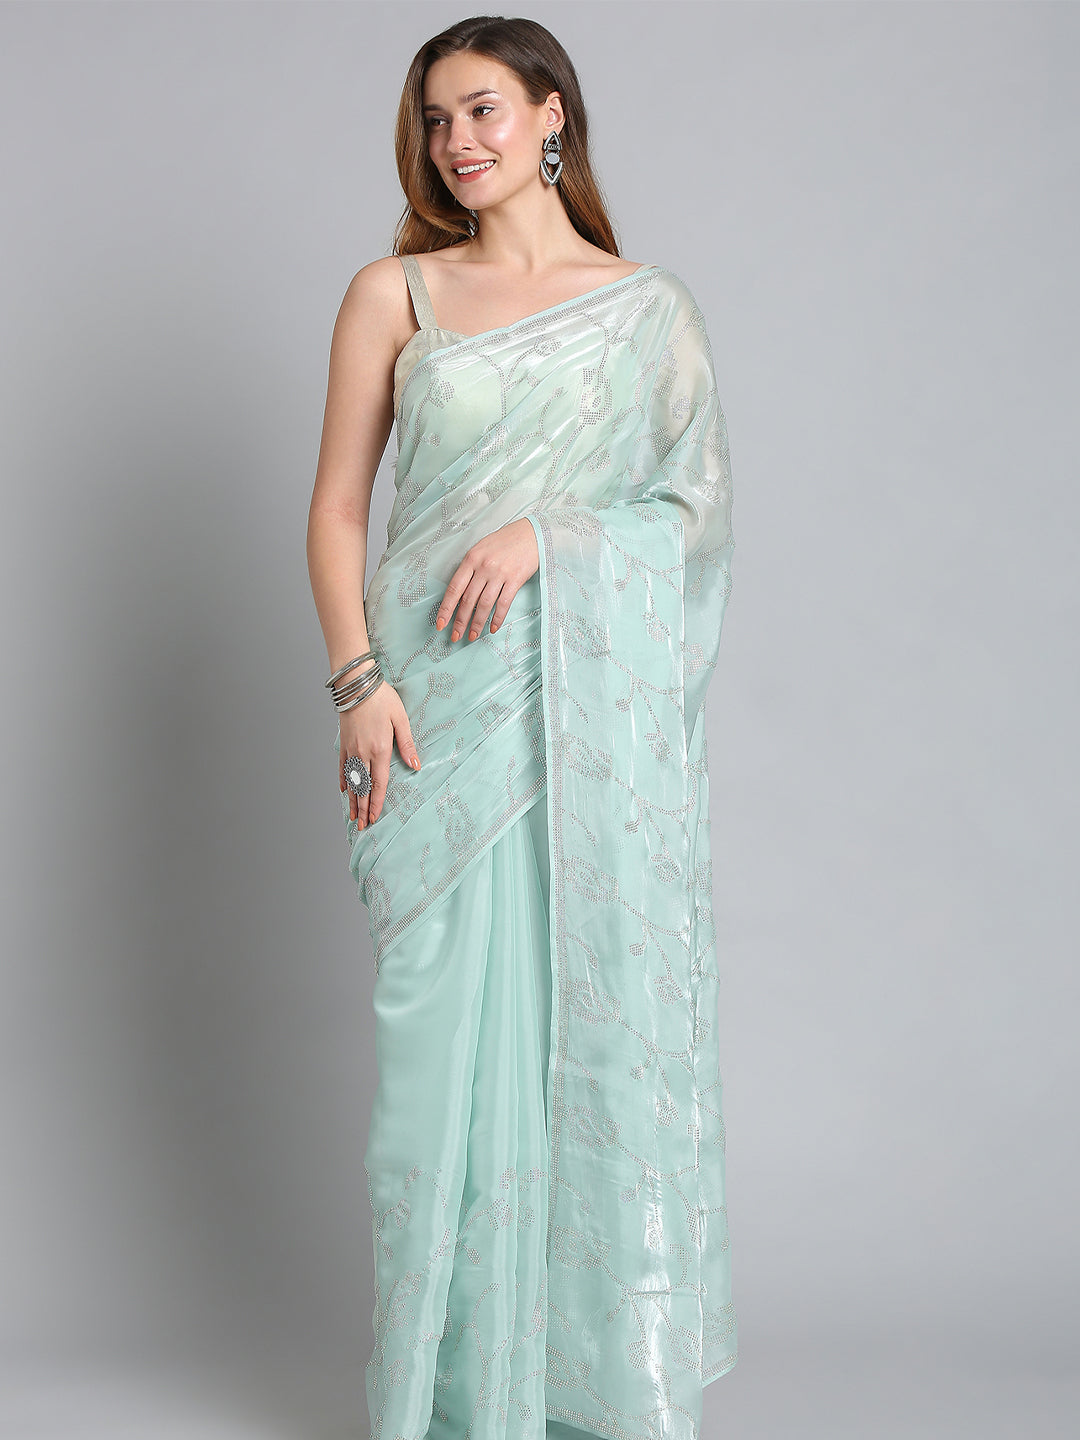 Sky Blue Soft Tissue Saree With Floral Embroidery